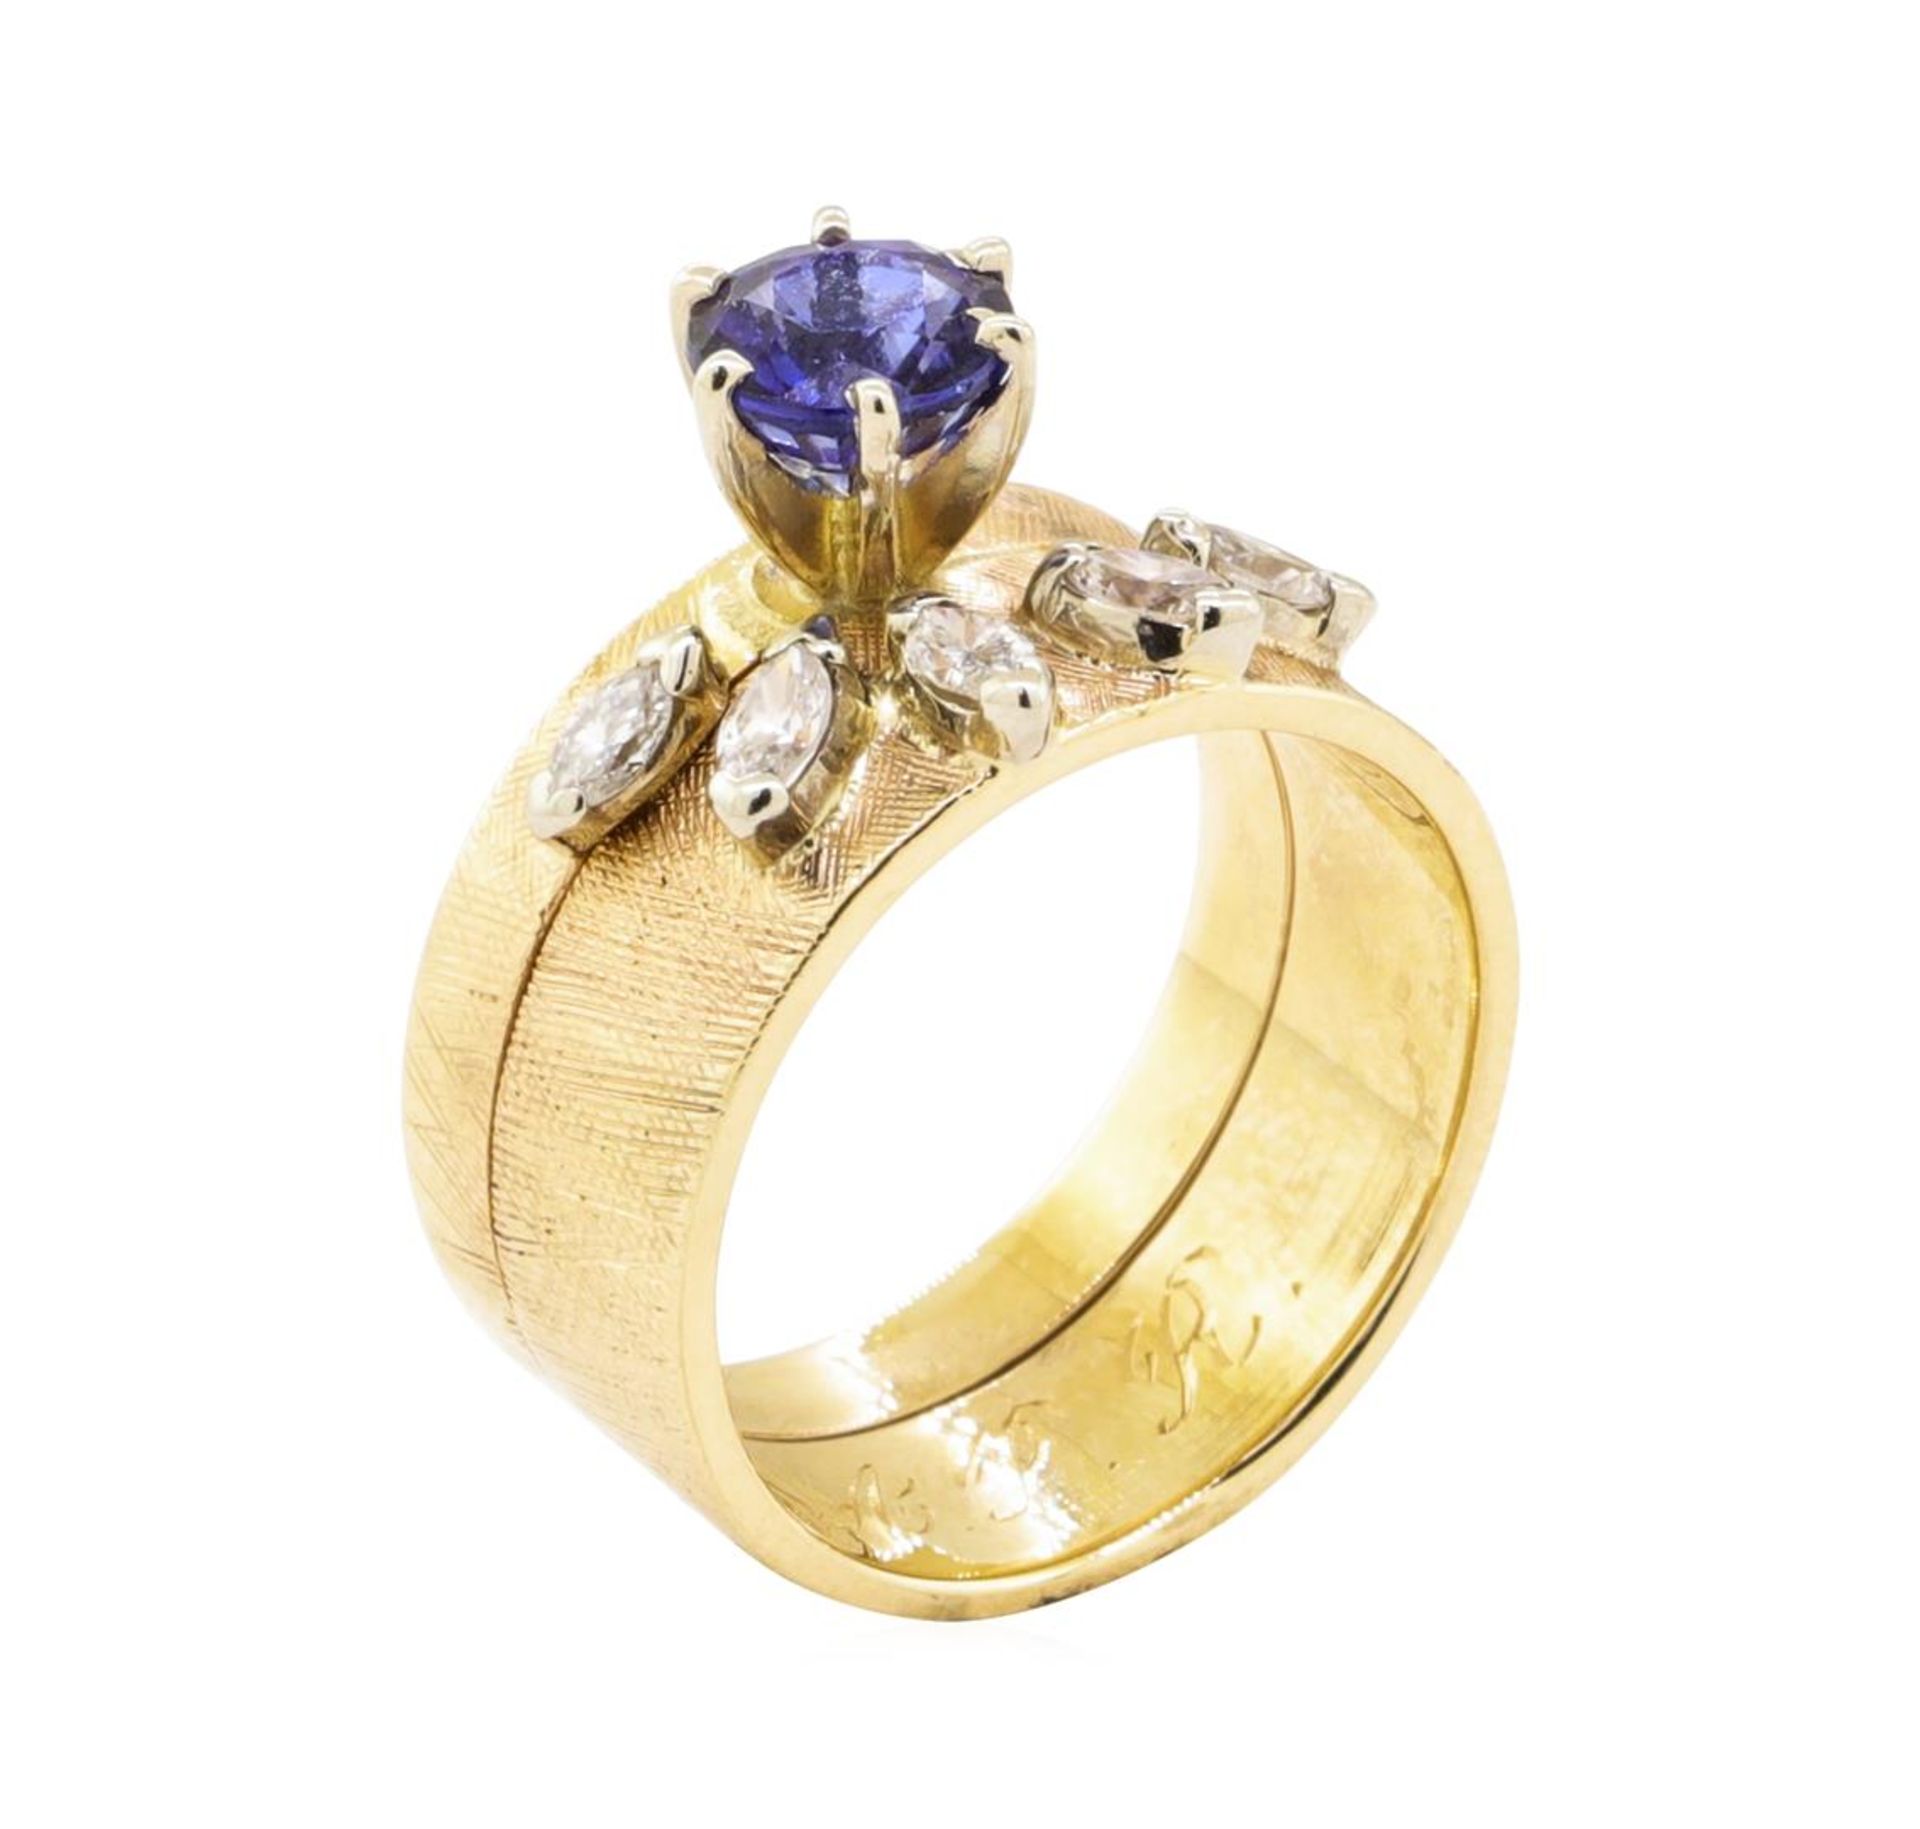 1.40 ctw Blue Sapphire and Diamond Ring - 14KT Yellow Gold - Image 4 of 4